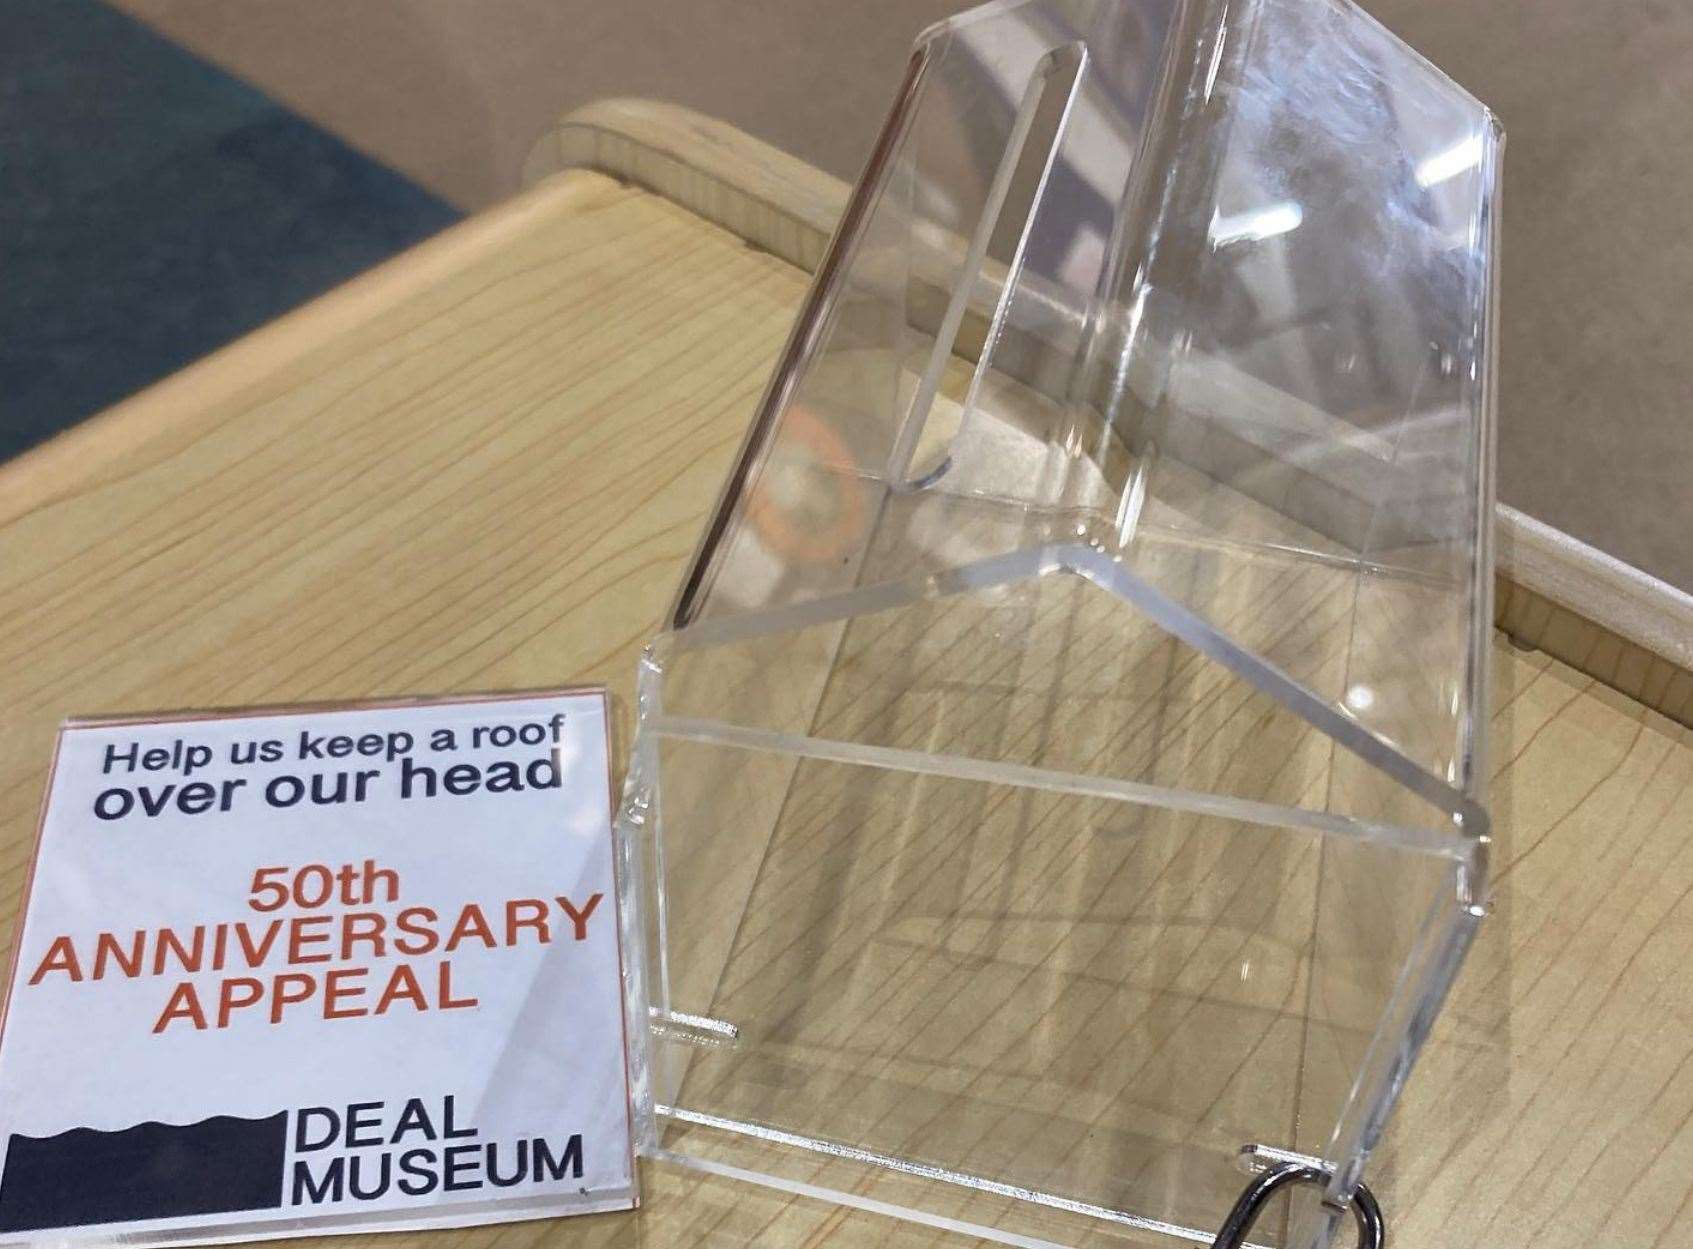 A donation box was seen smashed outside the museum. Picture: Deal Museum